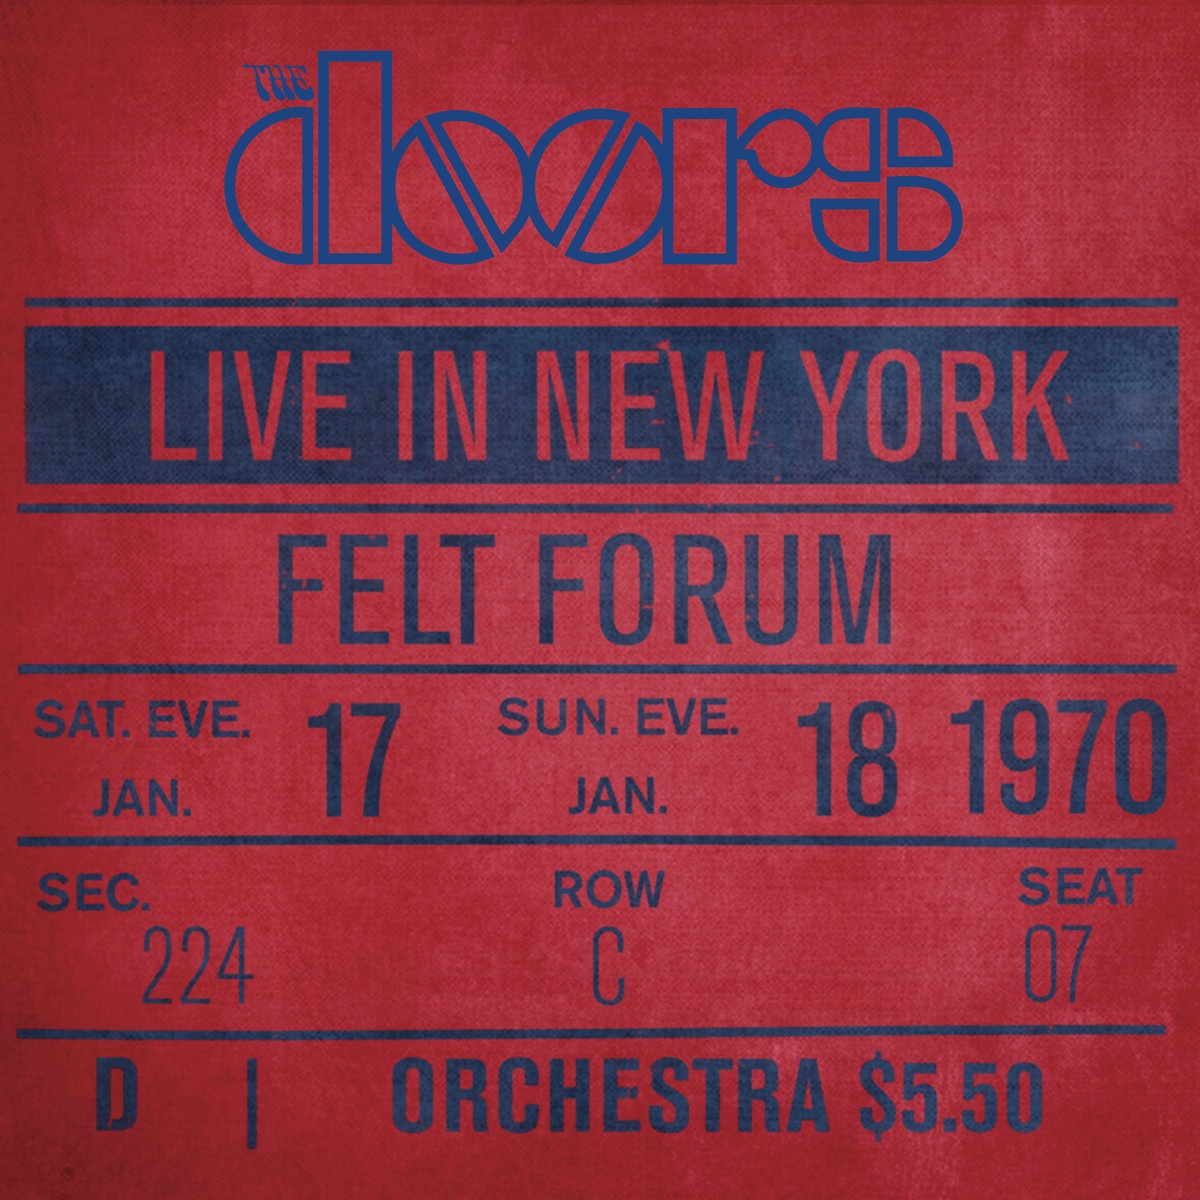 Break On Through [To The Other Side] [Live at Felt Forum, New York CIty, January 18, 1970 - First Show]